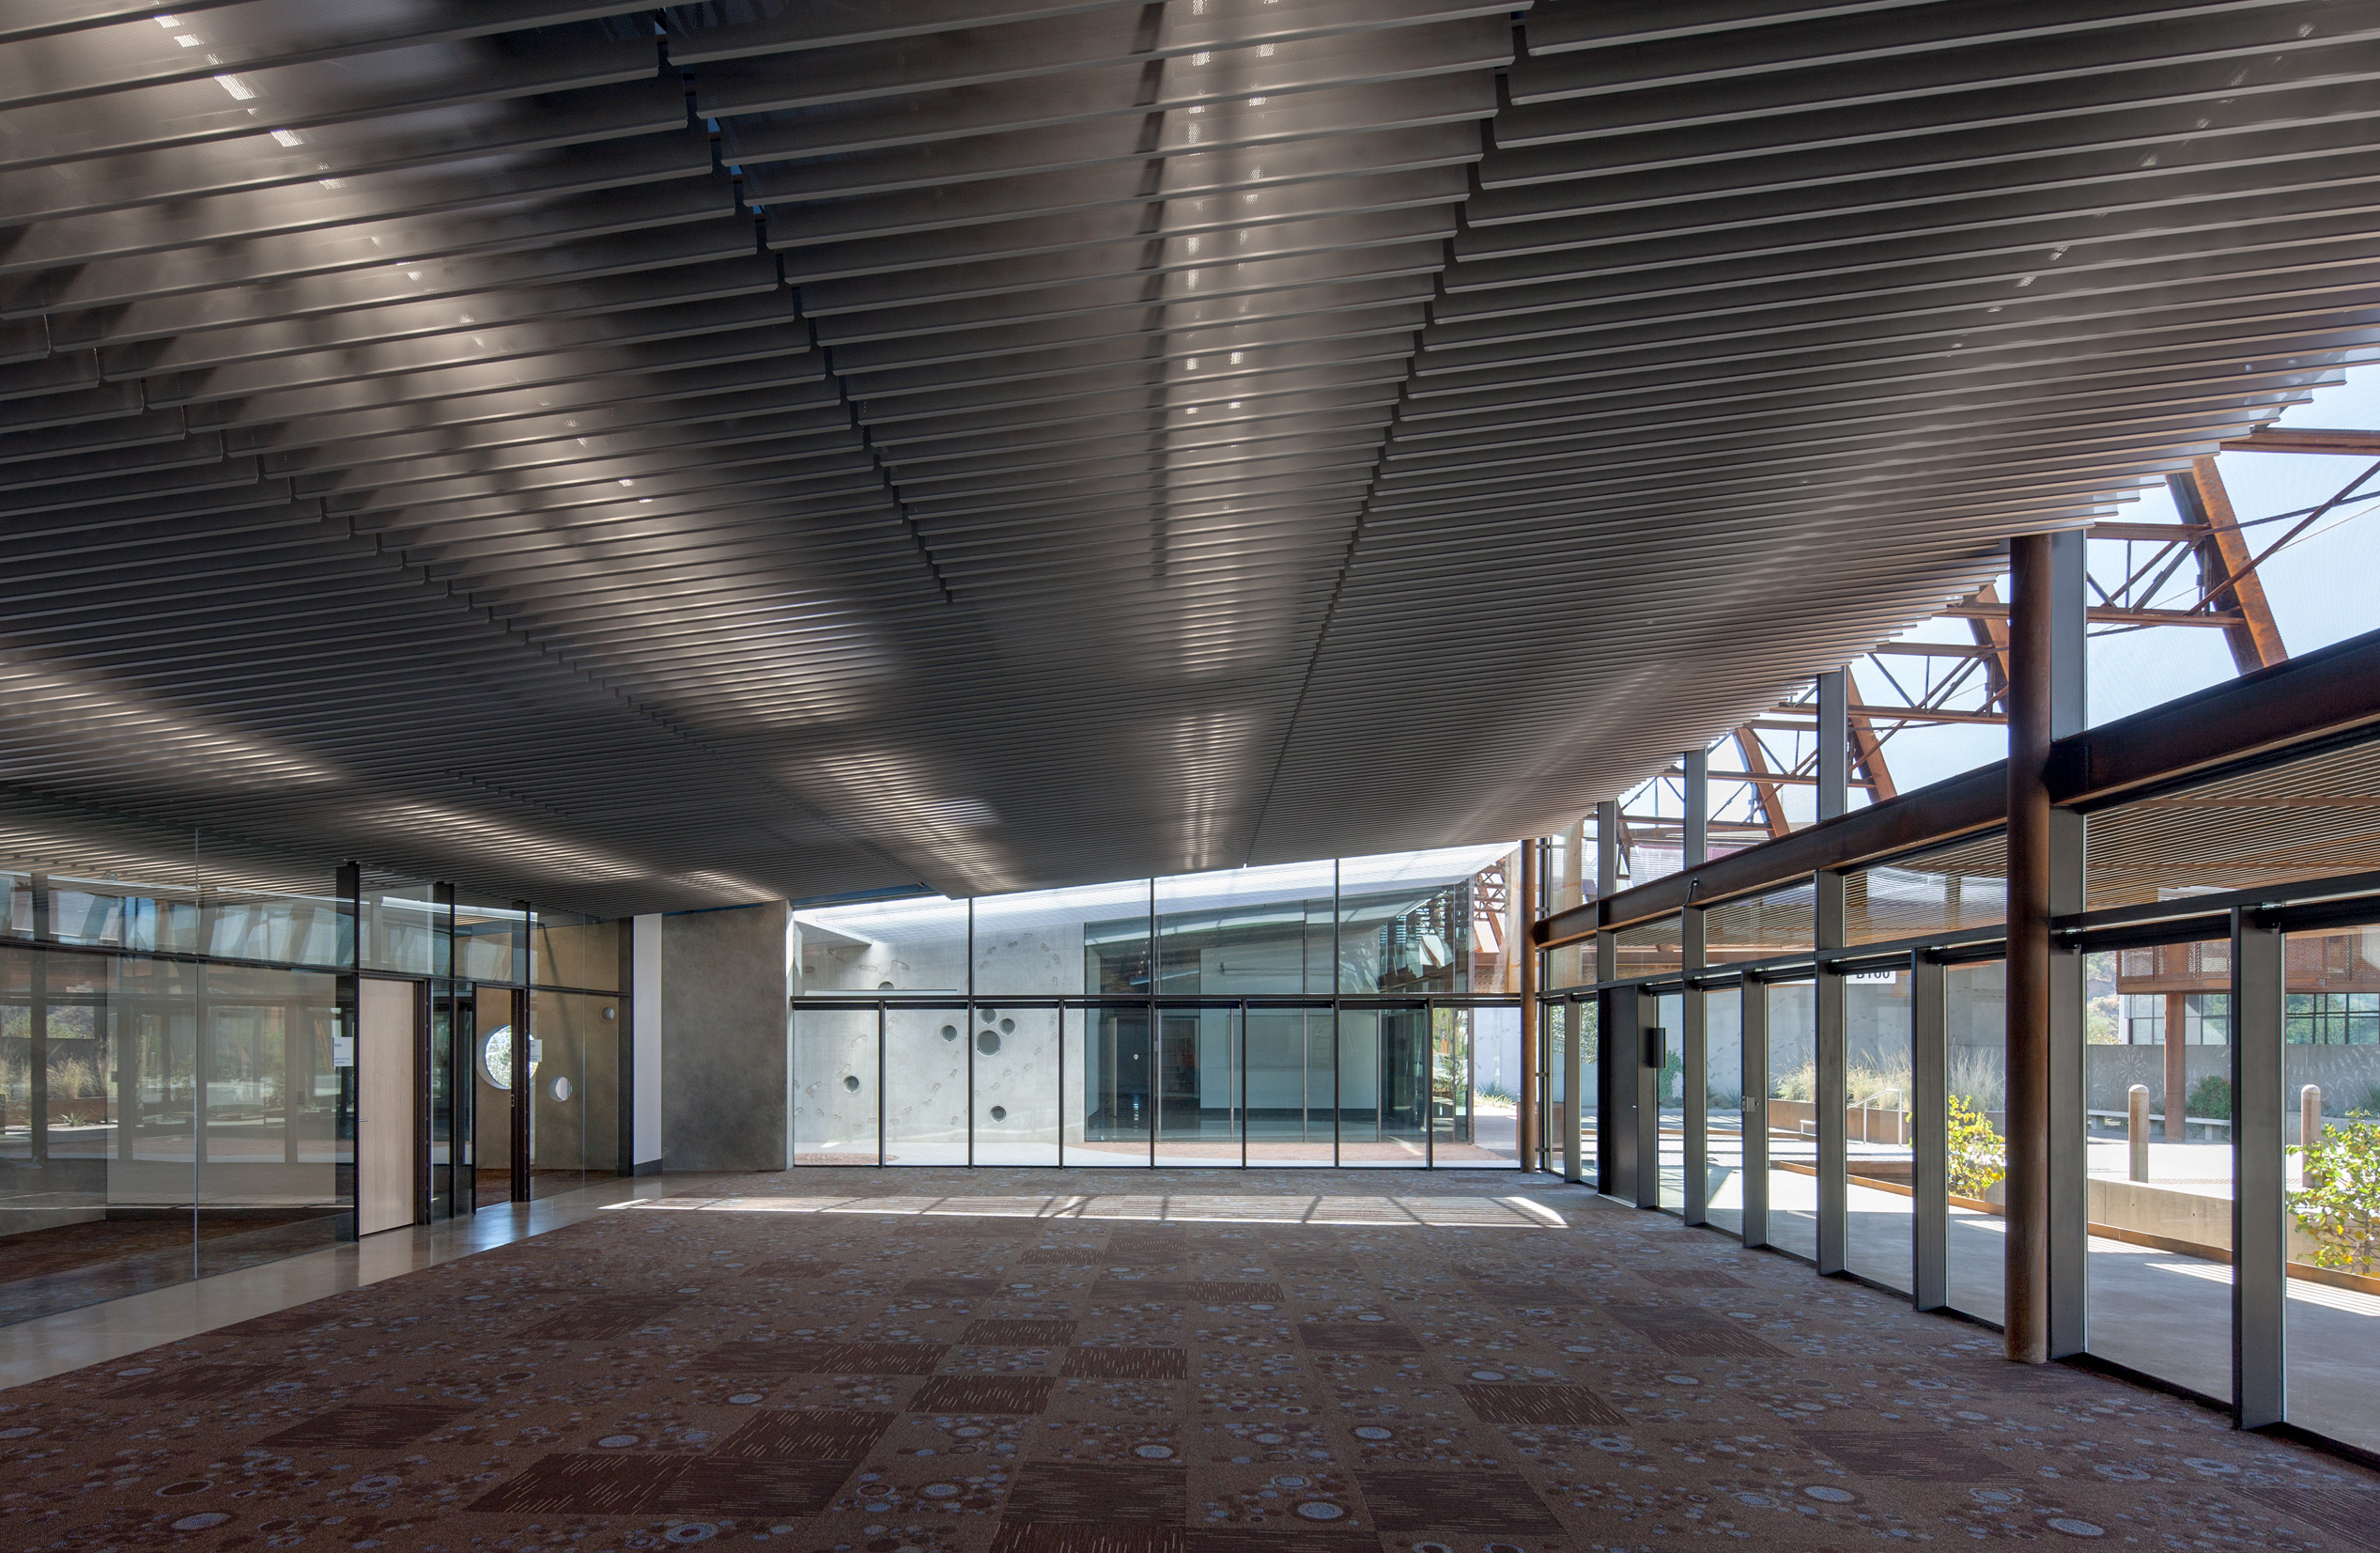 Mariposa features Hunter Douglas Architectural's V-200 Baffles Series ceilings